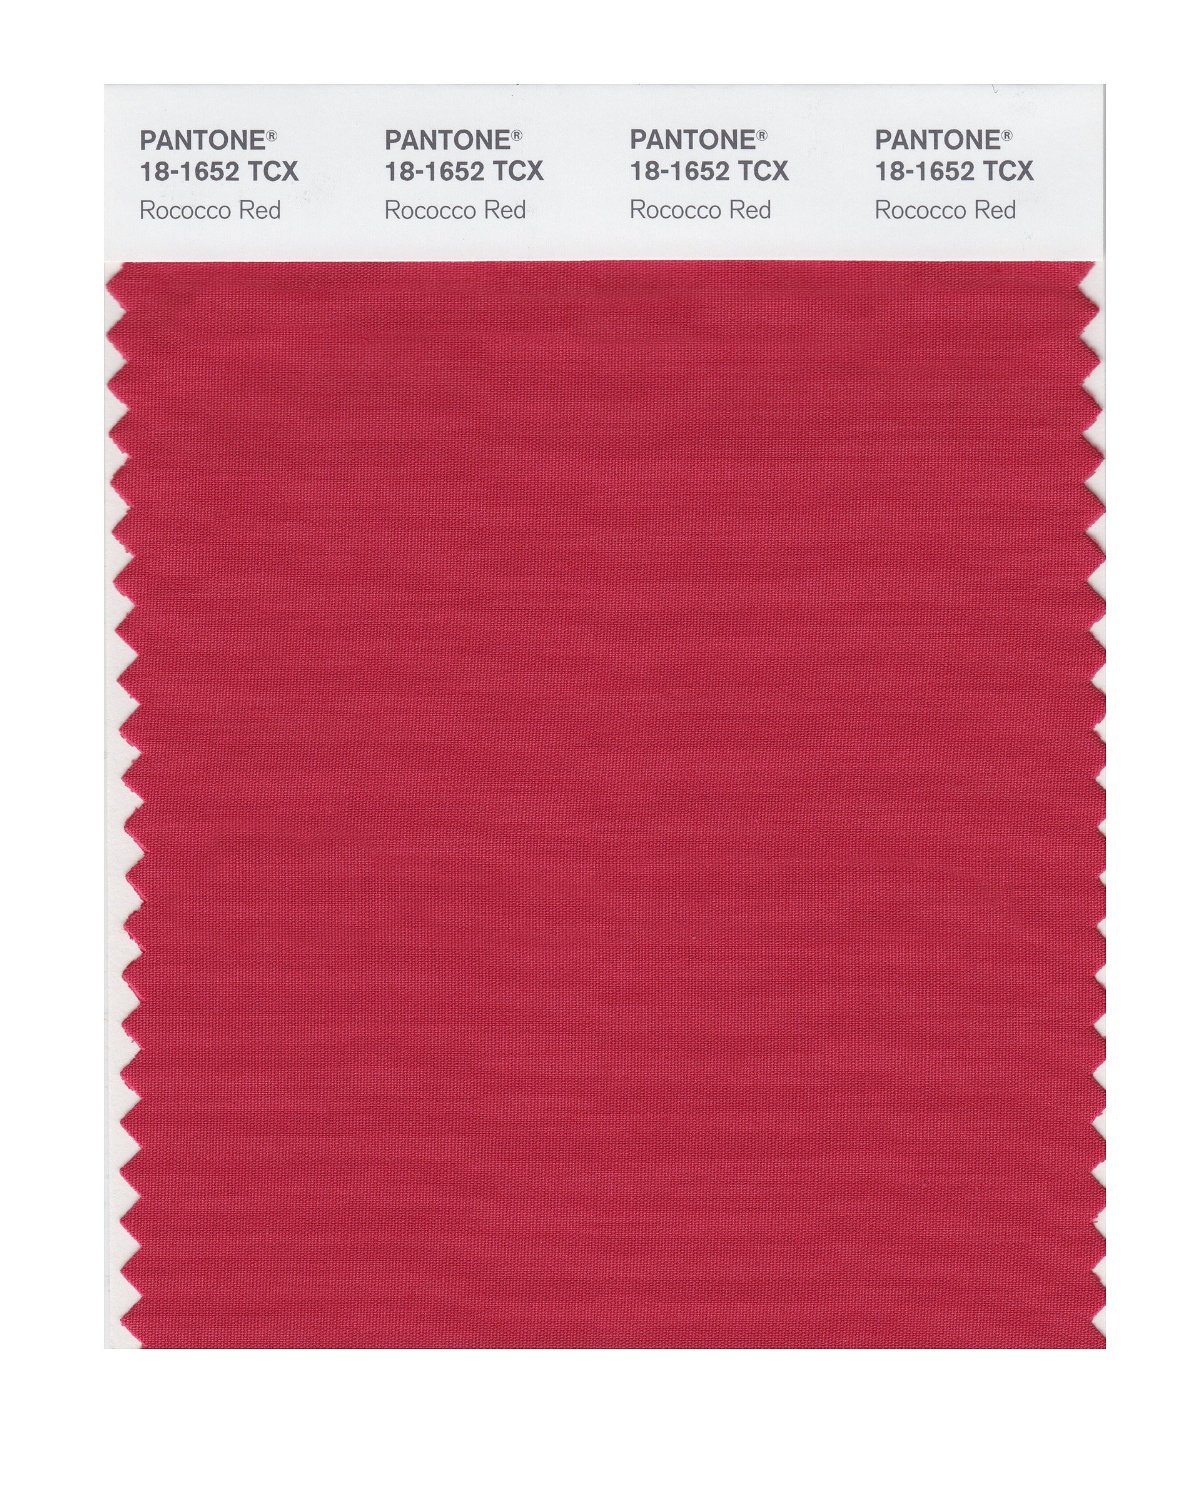 Pantone Cotton Swatch 18-1652 Rococco Red